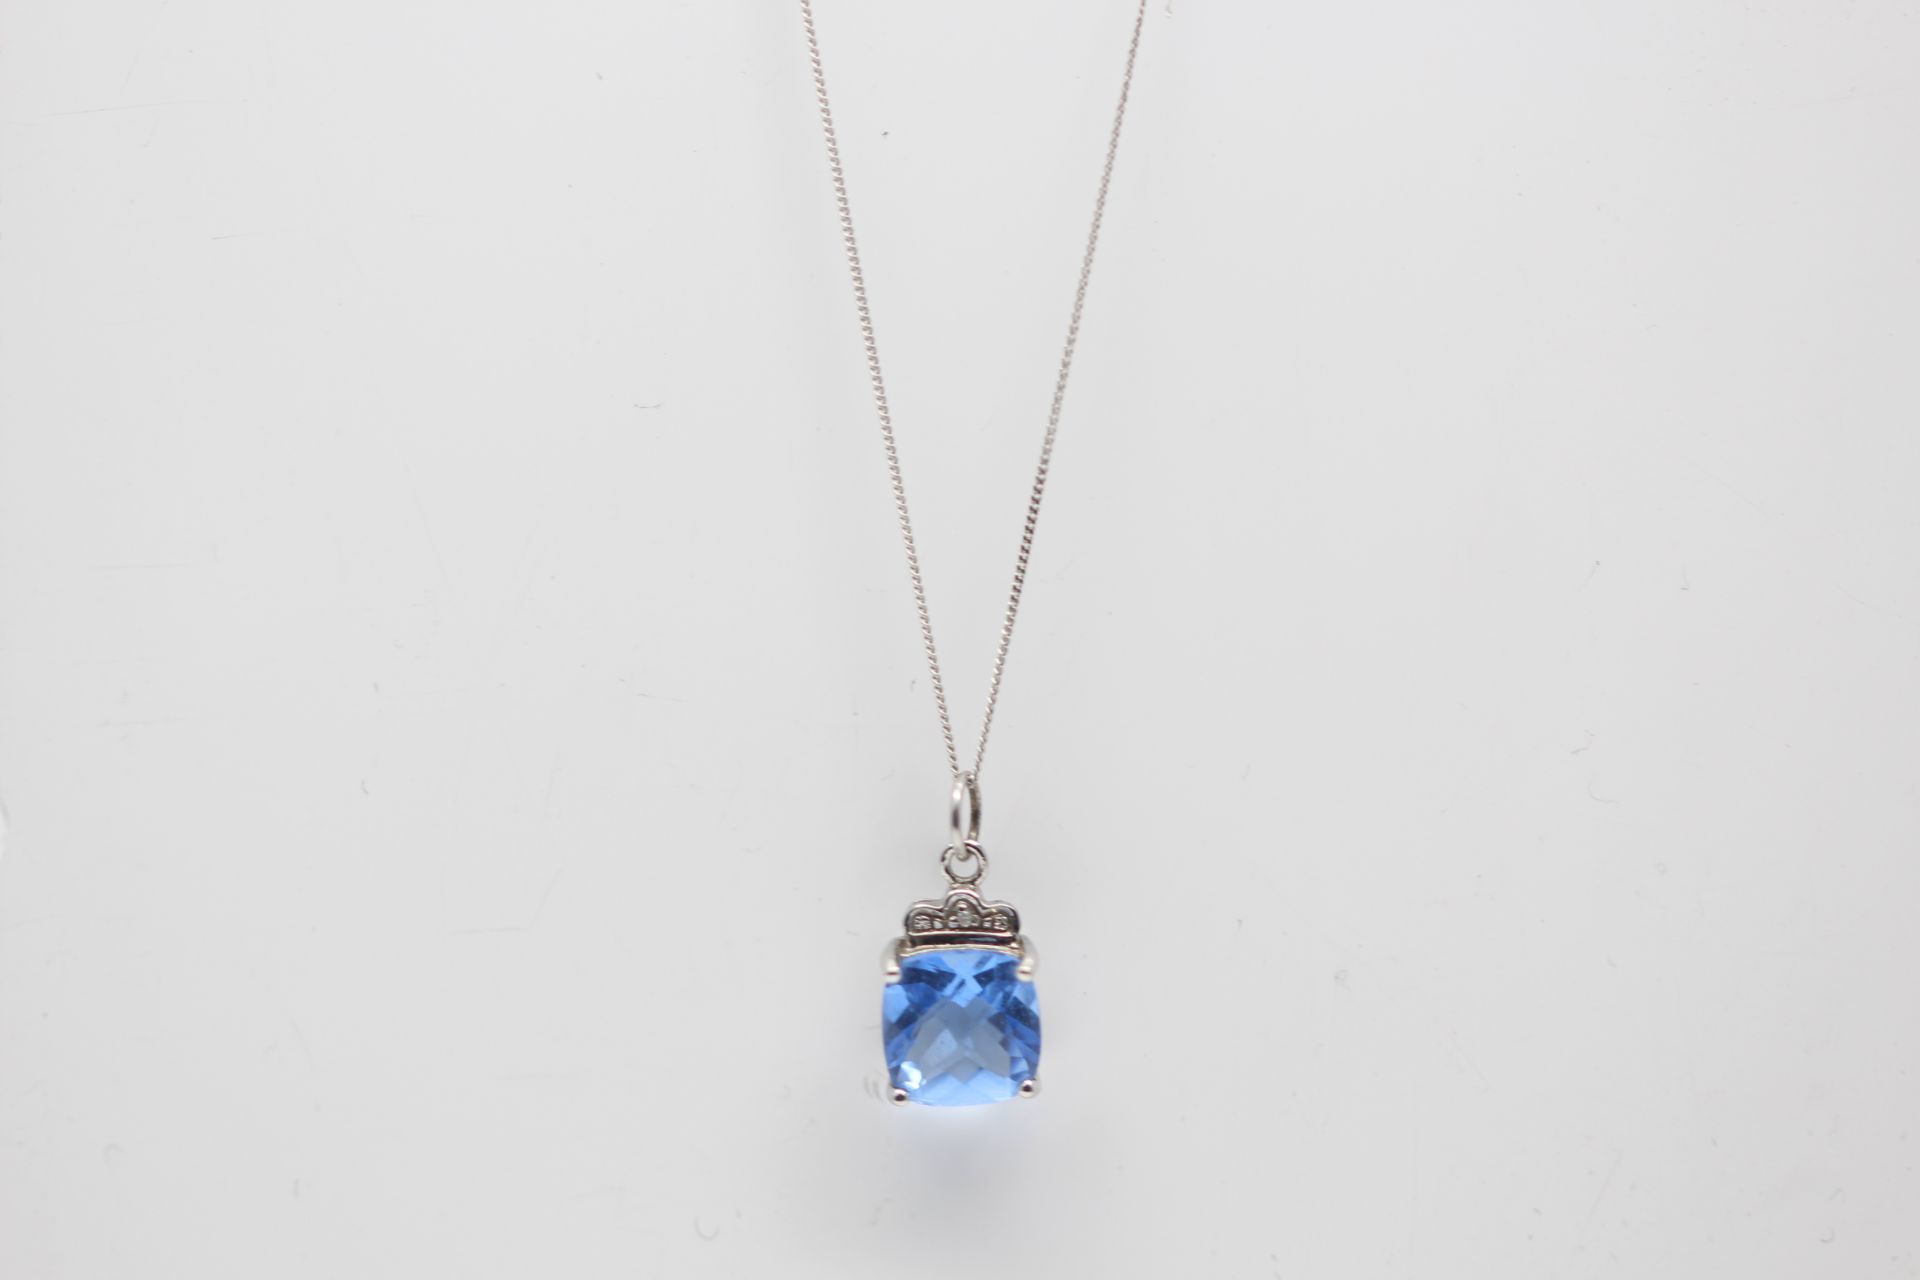 SOLID WHITE GOLD NECKLACE AND PENDENT, PENDENT SET WITH 2.00 CARAT INTENSE BLUE TOPAZ WITH